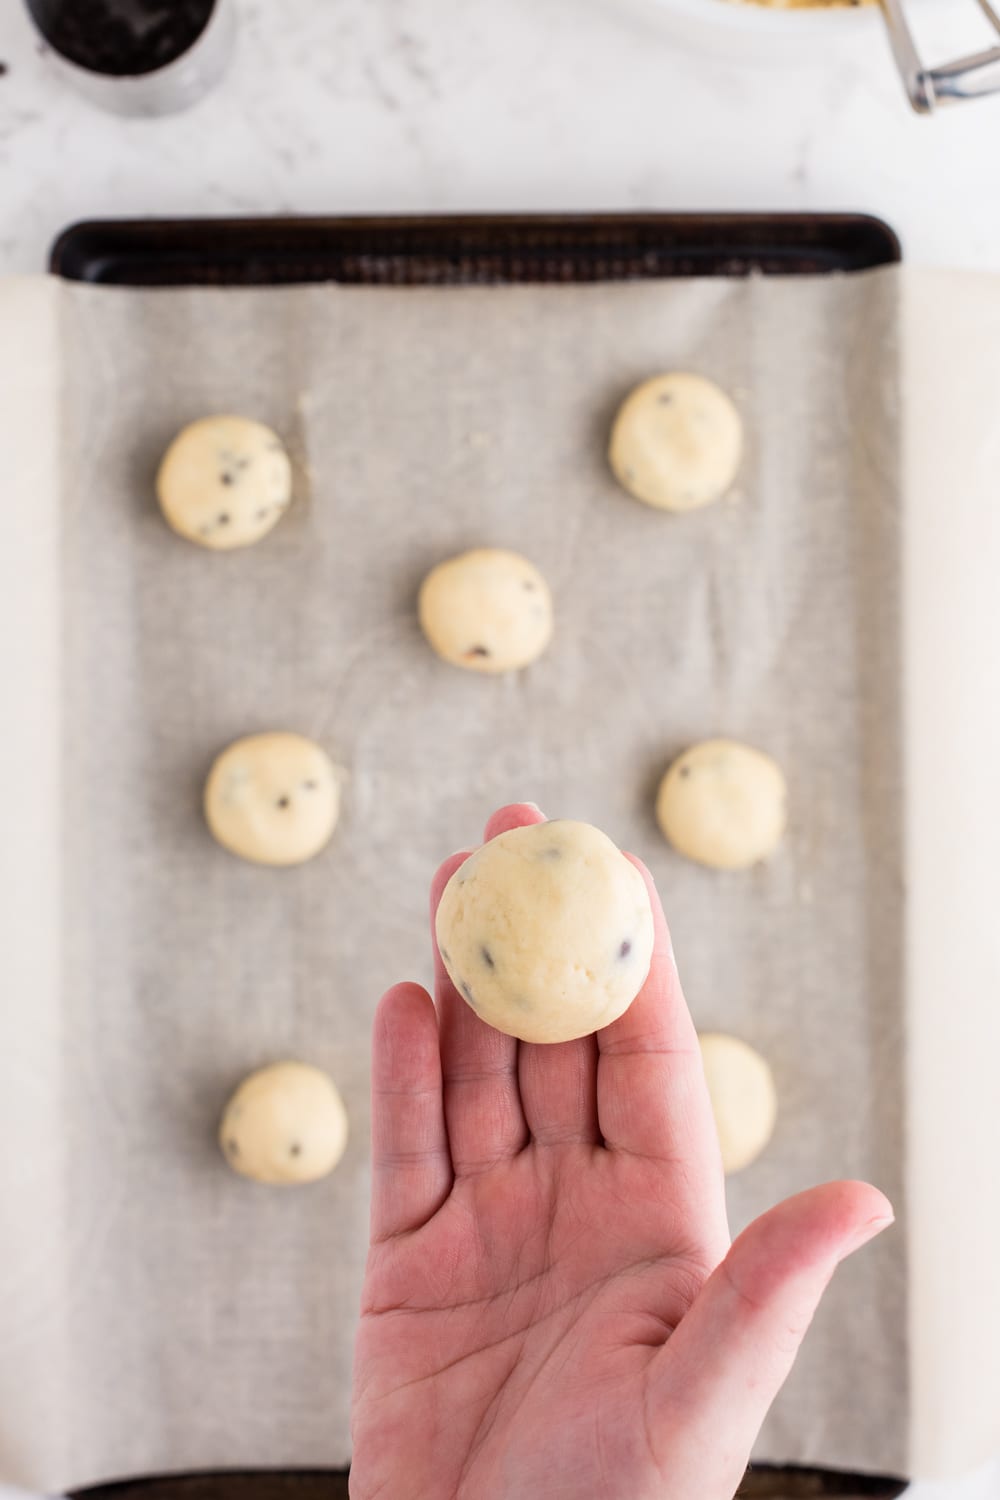 Rolled cookie dough ball held over a baking tray lined with parchment paper filled with rolled balls of cookie dough, metal measuring spoon filled with chocolate chips, striped kitchen linen